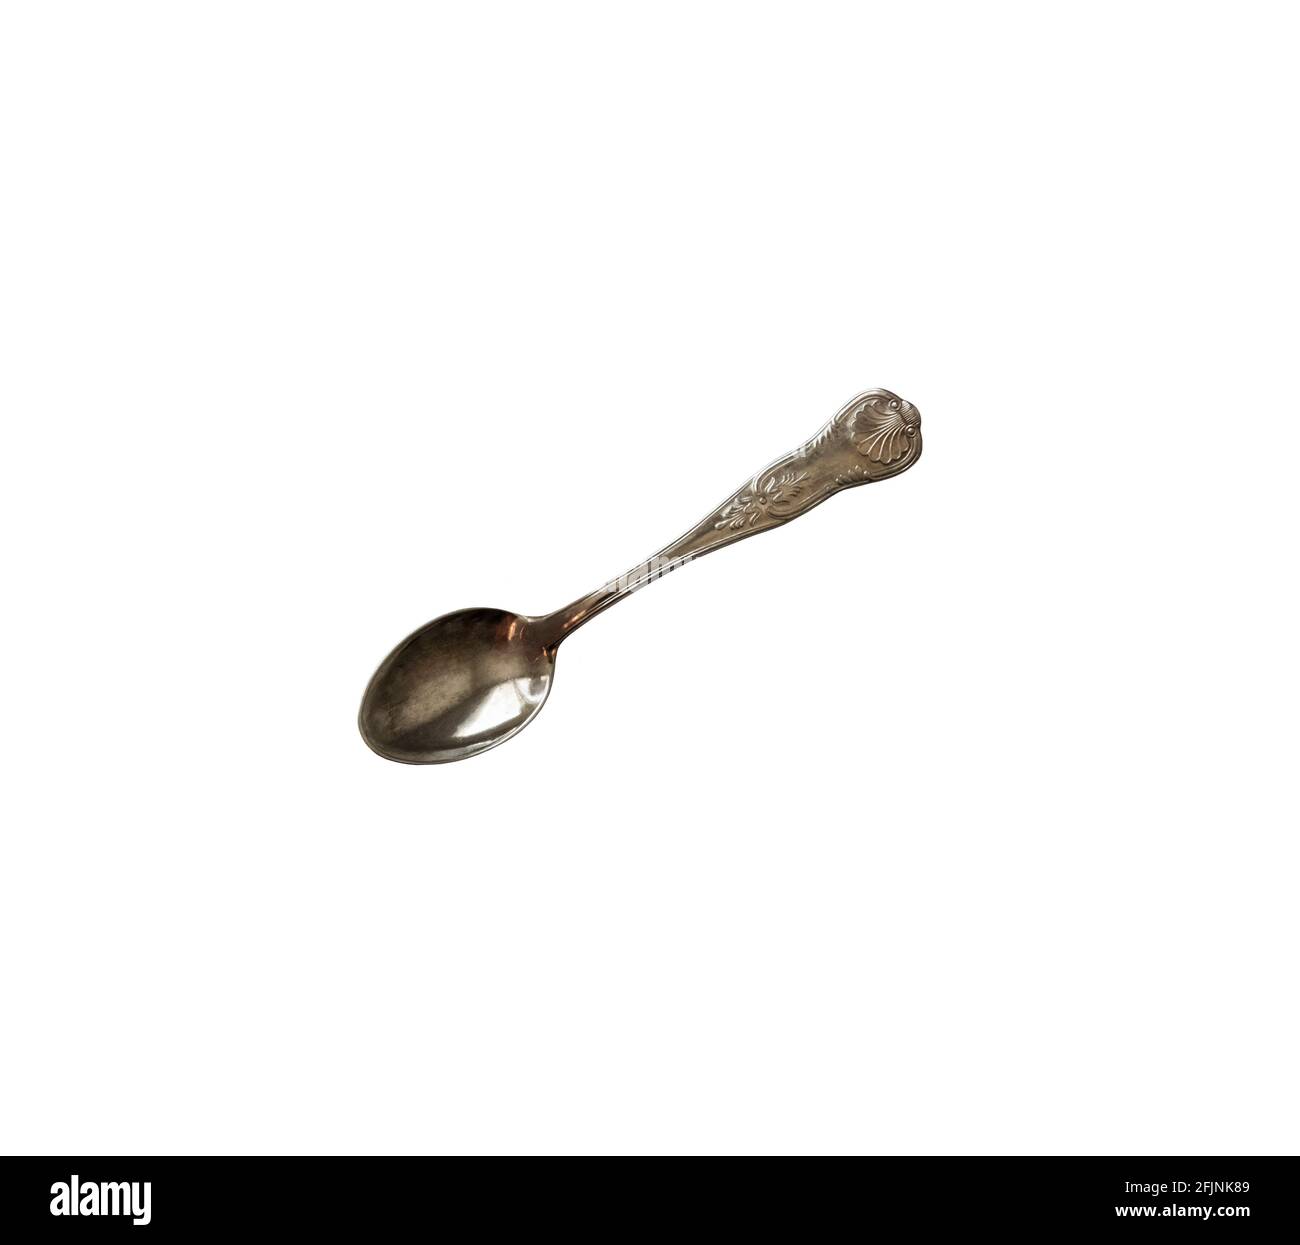 Silver empty coffee spoon isolated object on the white background, kitchen cooking utensils for tea or coffee ceremony, delicate ancient tableware, cu Stock Photo